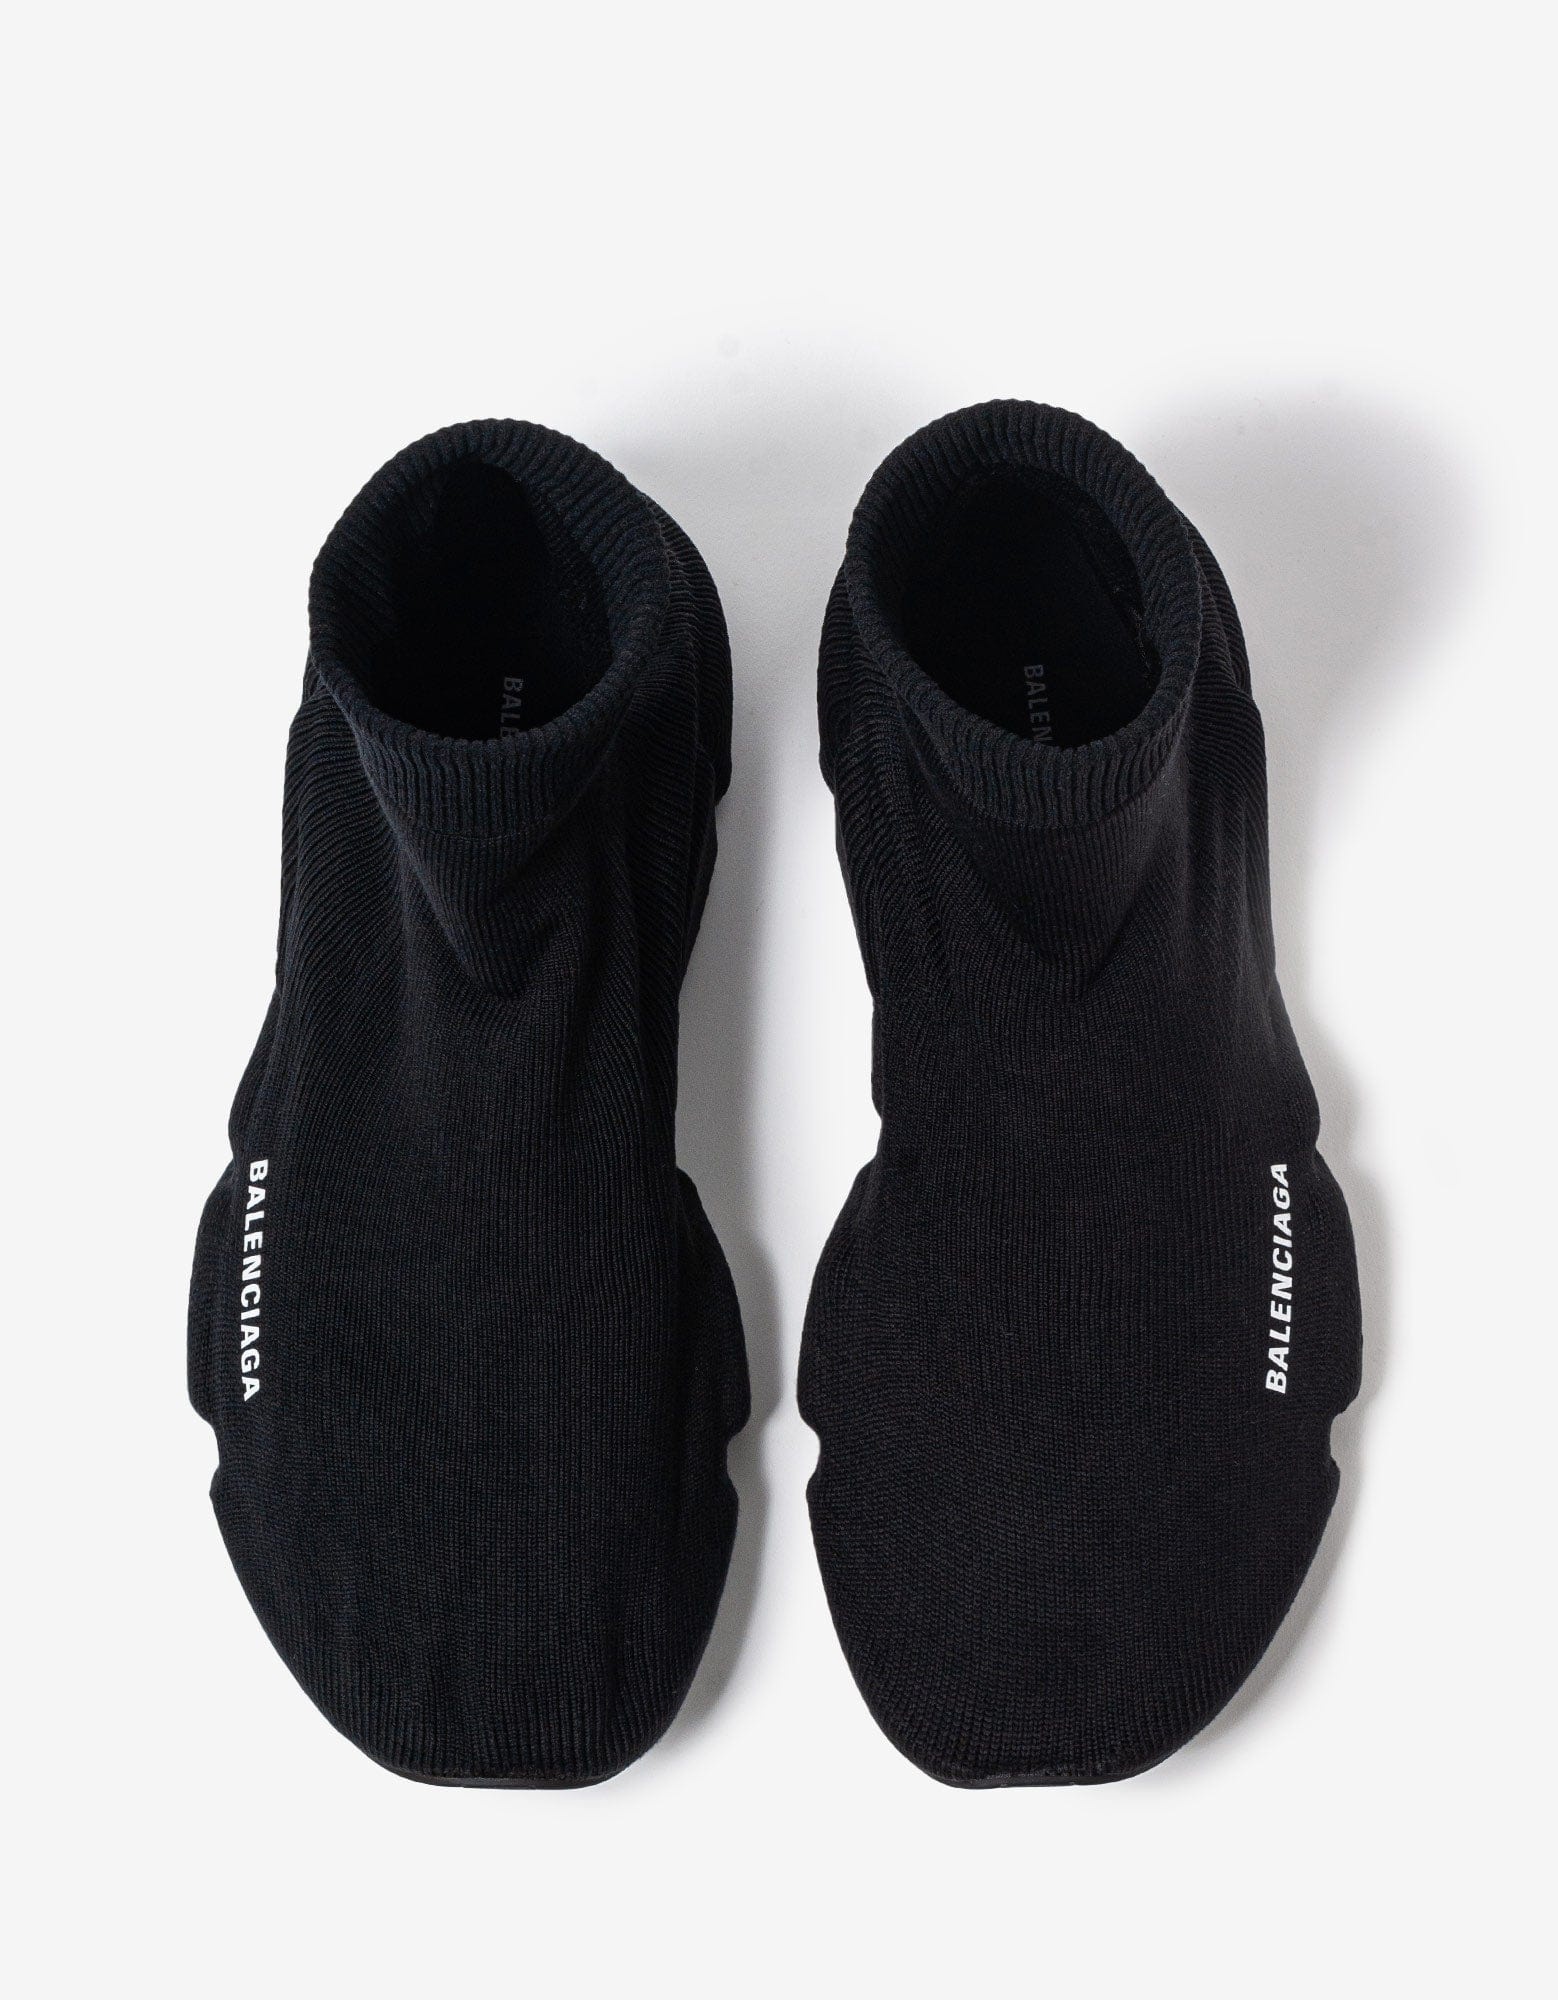 Black Full Knit Speed Trainers - 5